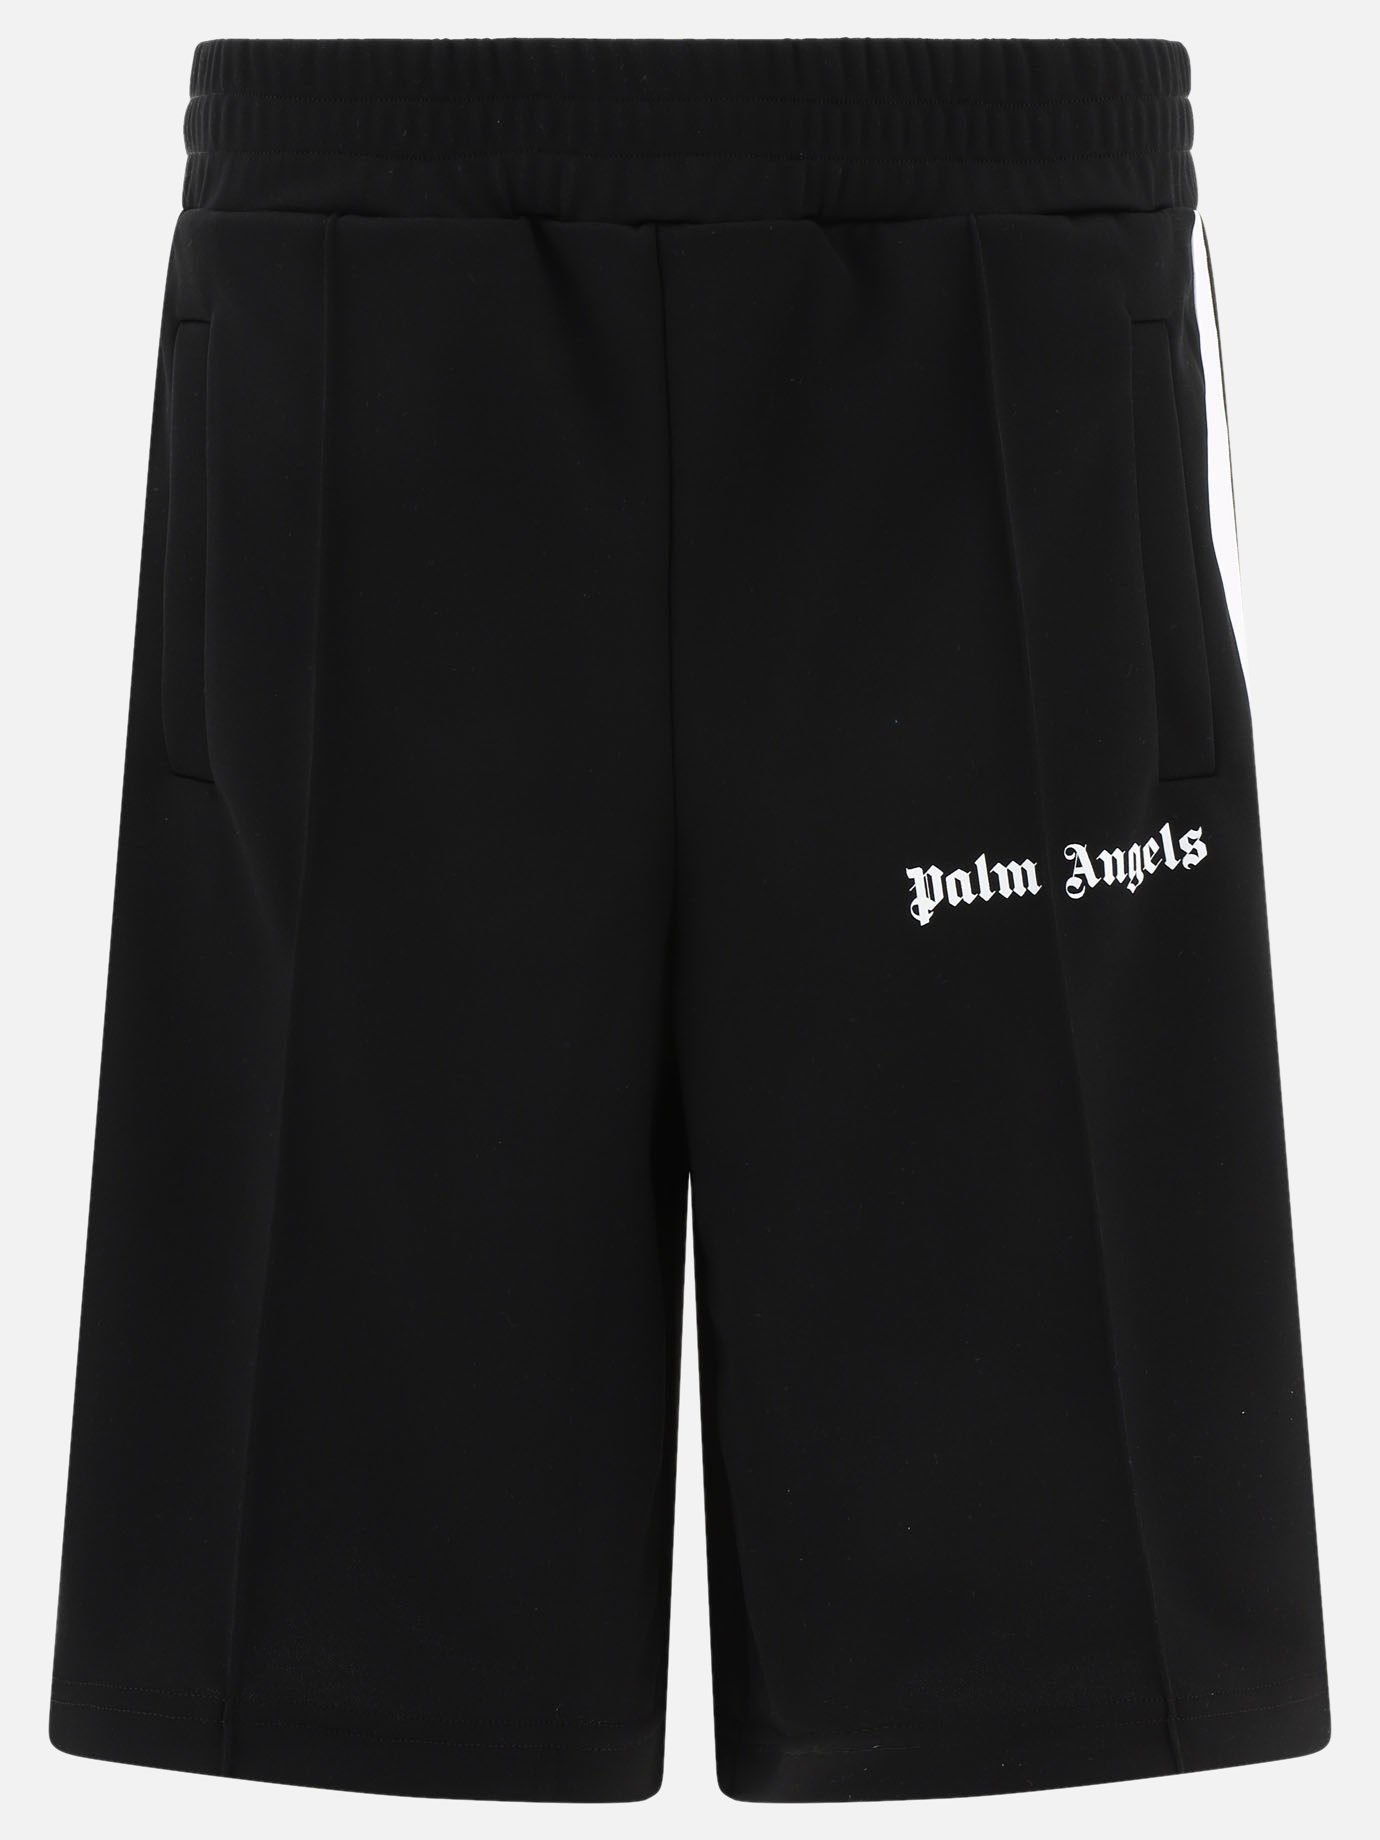  Classic Track  shorts by Palm Angels